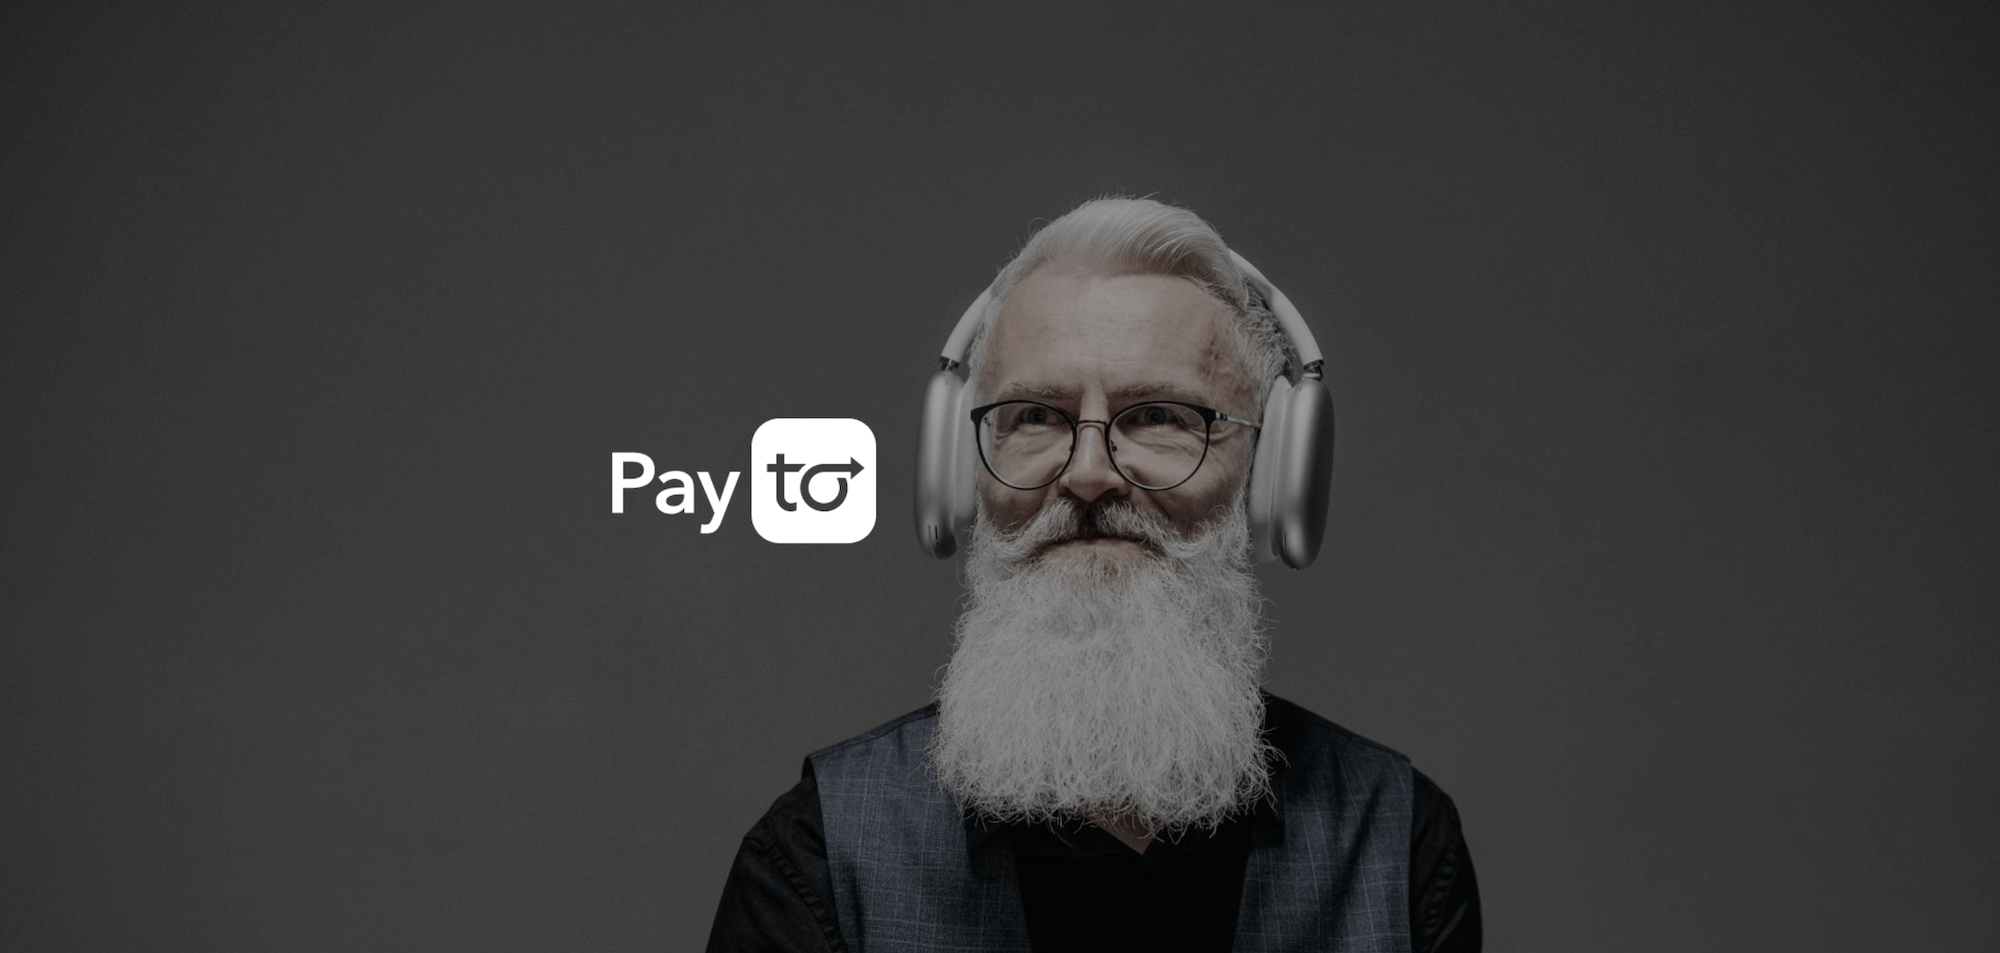 PayTo: Five Things Consumers Will Love featured image